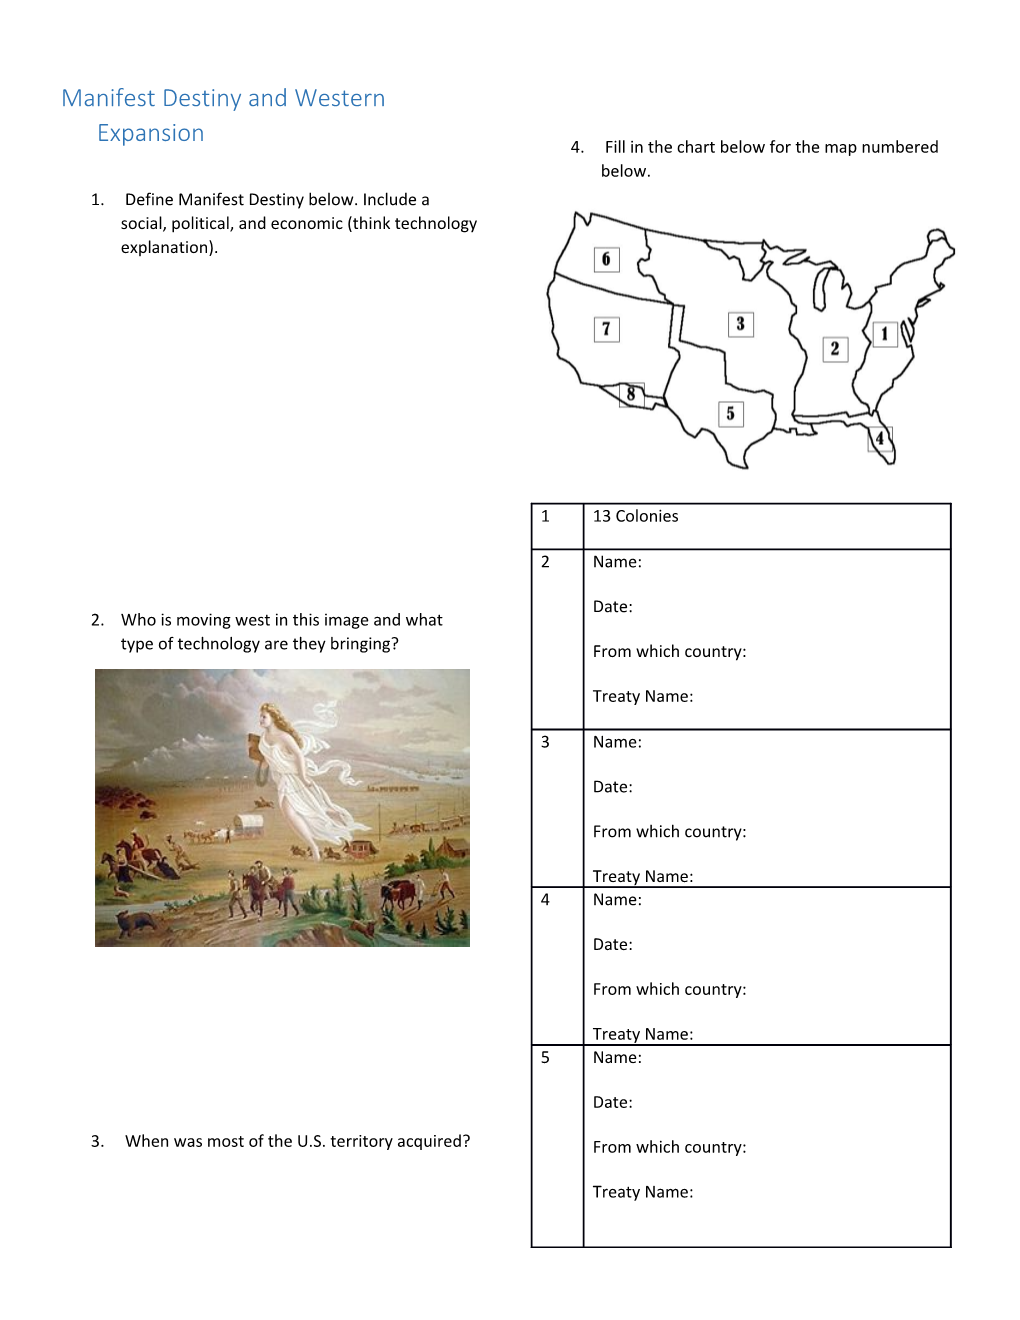 Manifest Destiny and Western Expansion